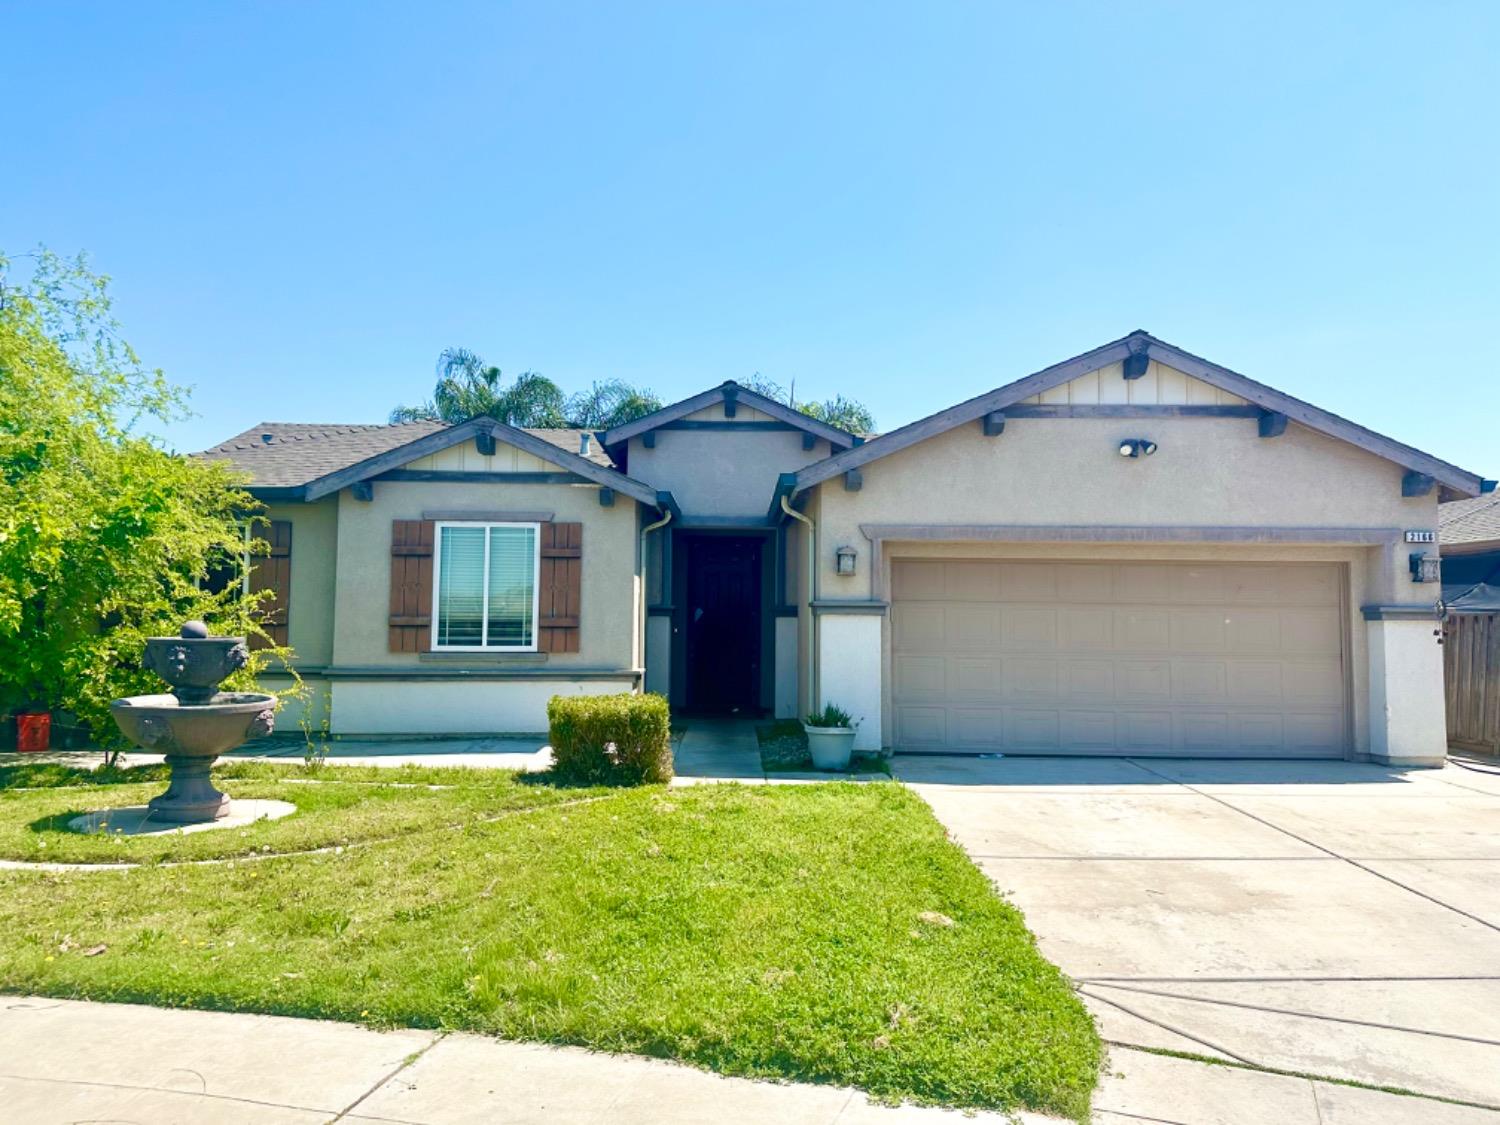 Photo of 2166 N Constance Dr in Fresno, CA